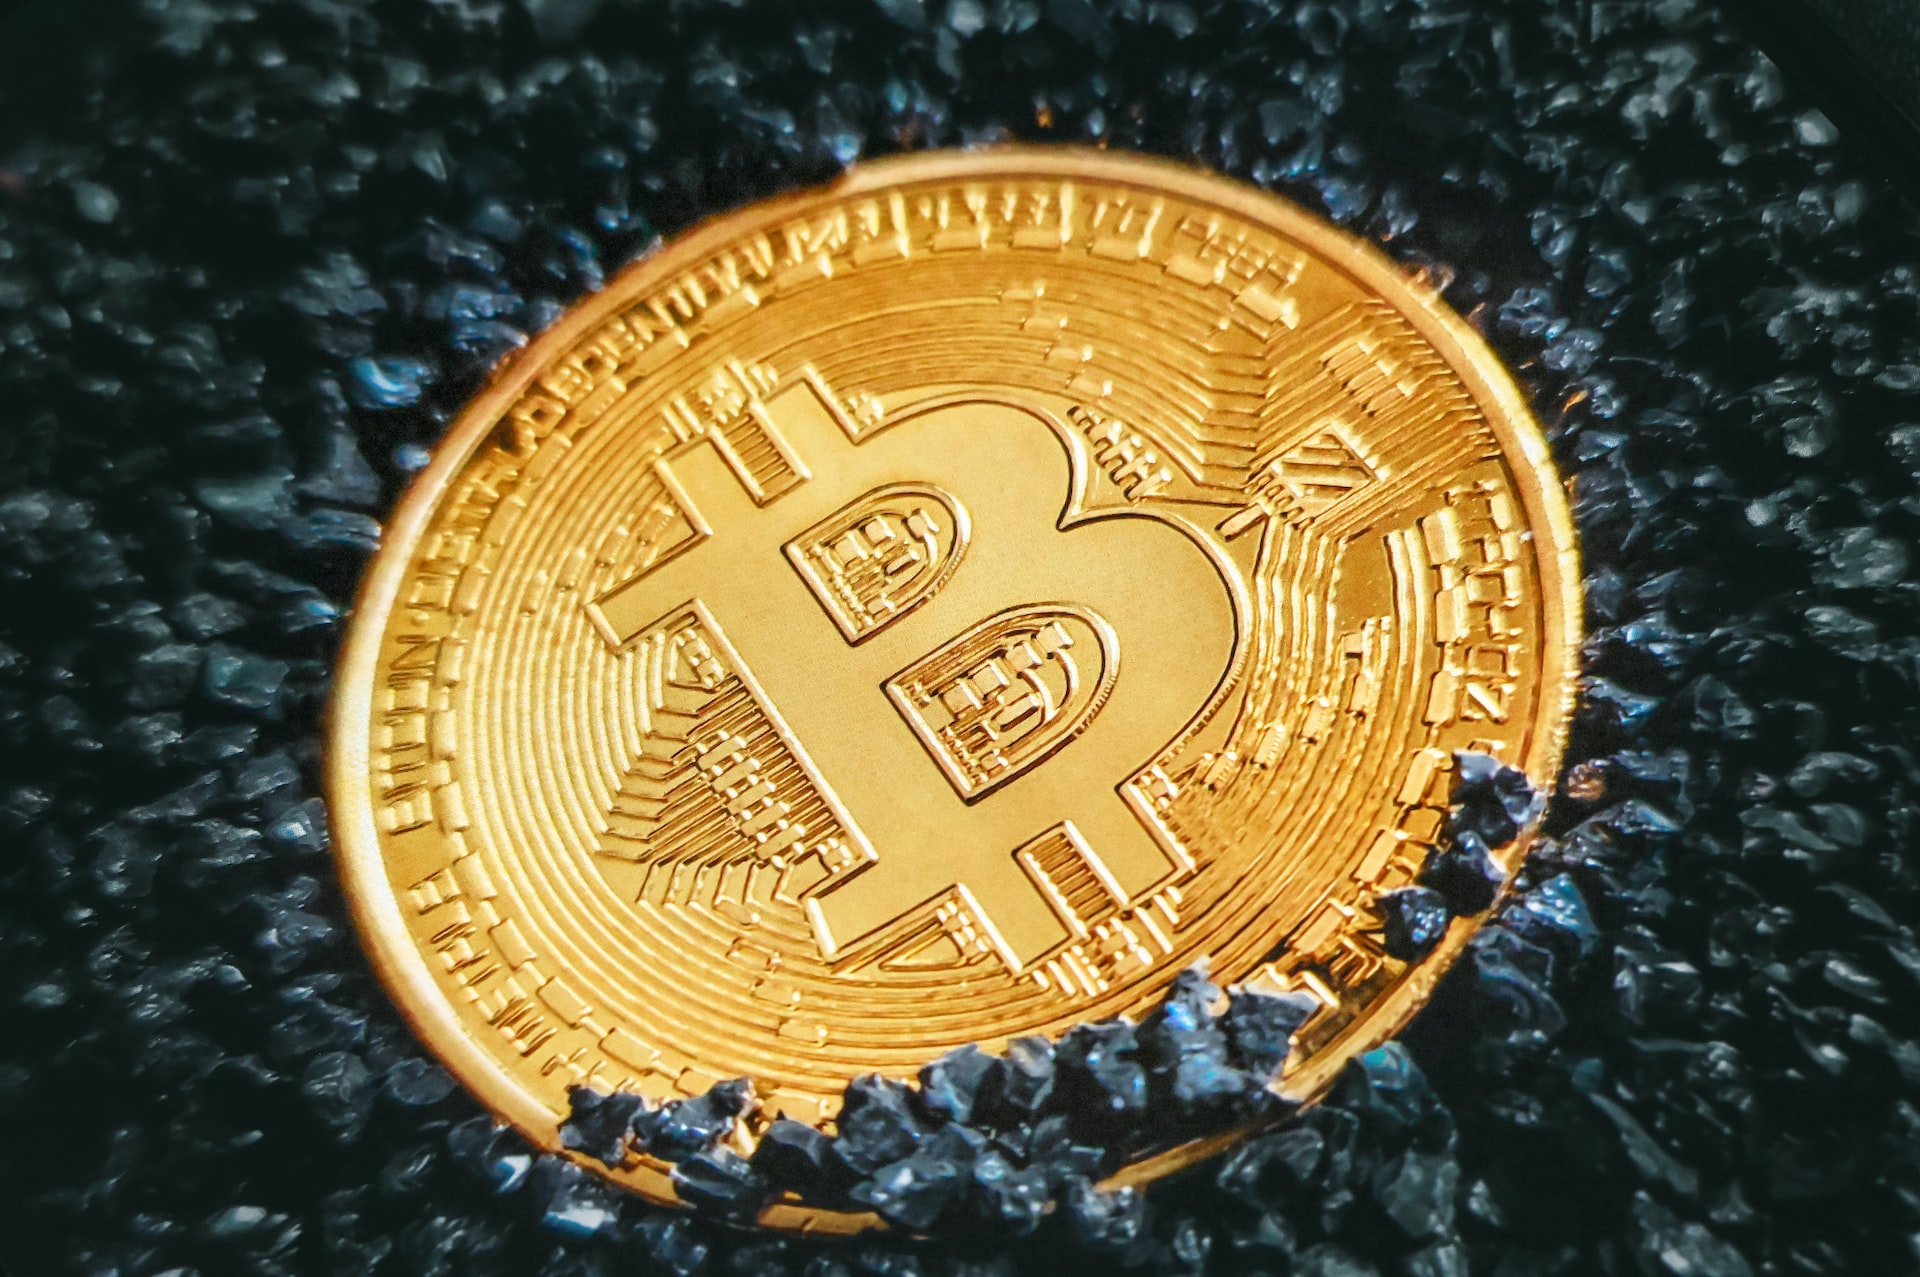 Is The Cryptocurrency Bitcoin a Good Idea?